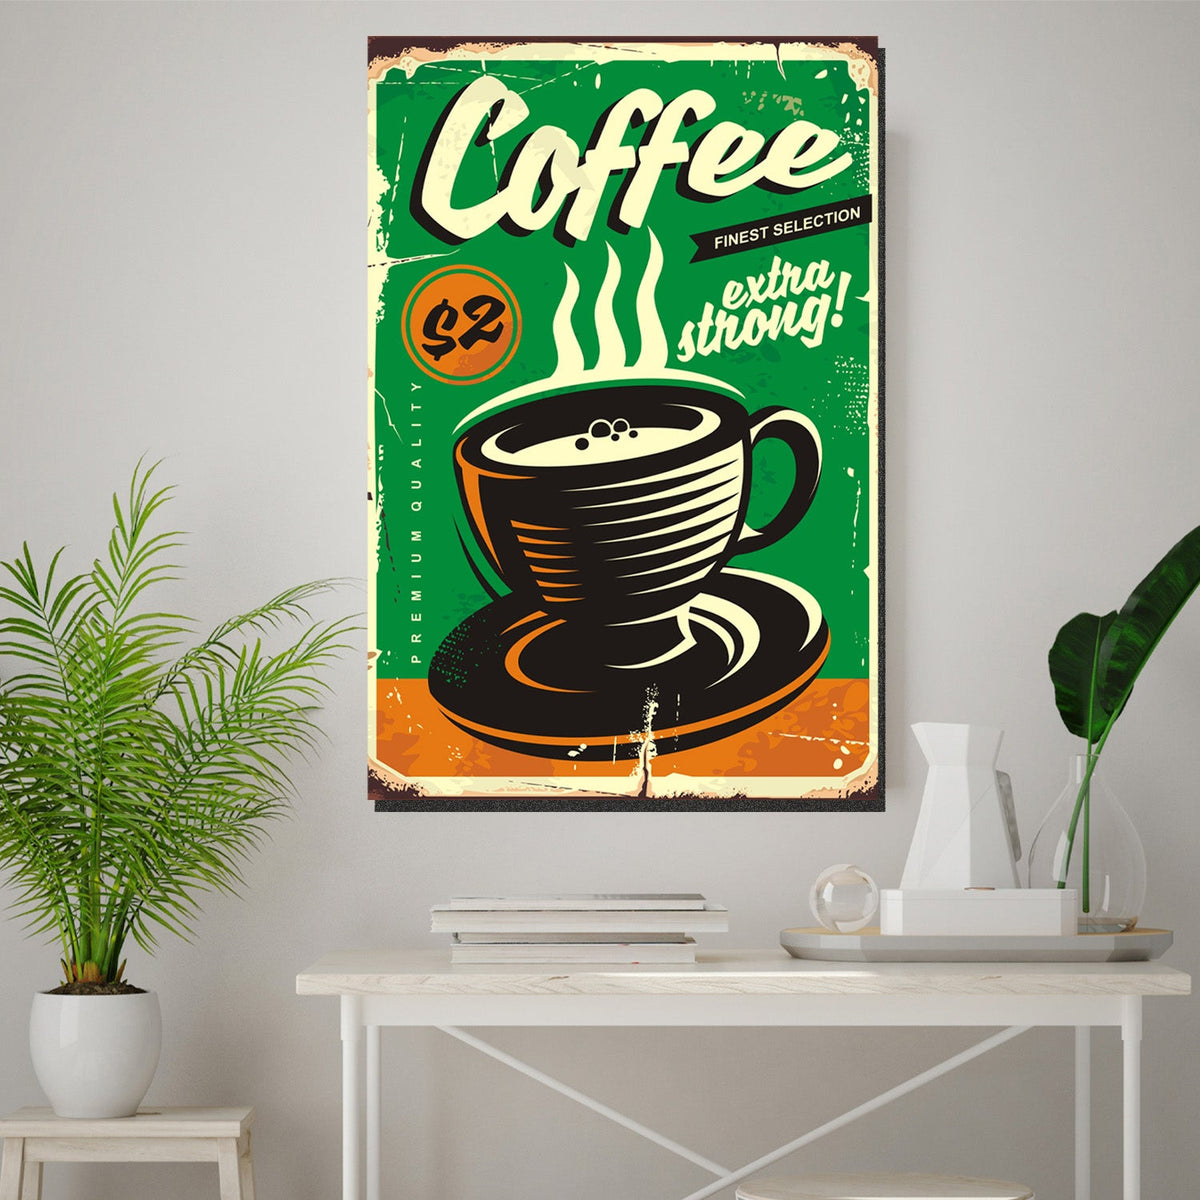 https://cdn.shopify.com/s/files/1/0387/9986/8044/products/CoffeeVintageTinSignCanvasArtprintStretched-4.jpg